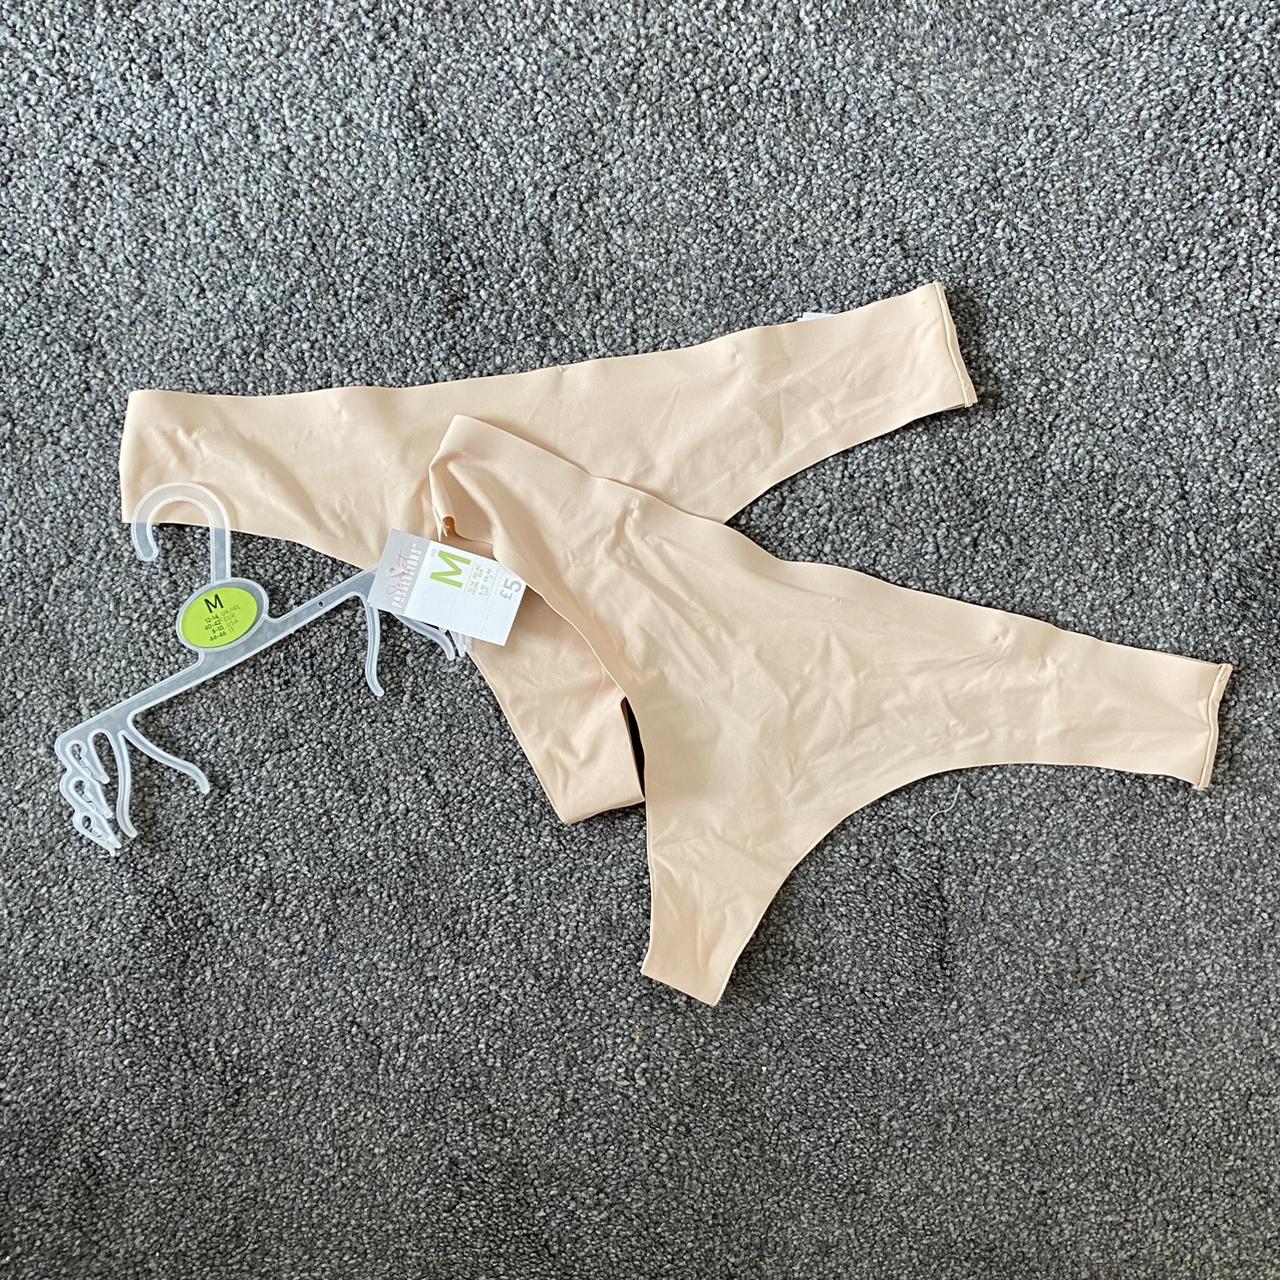 2 x No seams thongs lingerie , Brand new with tags.